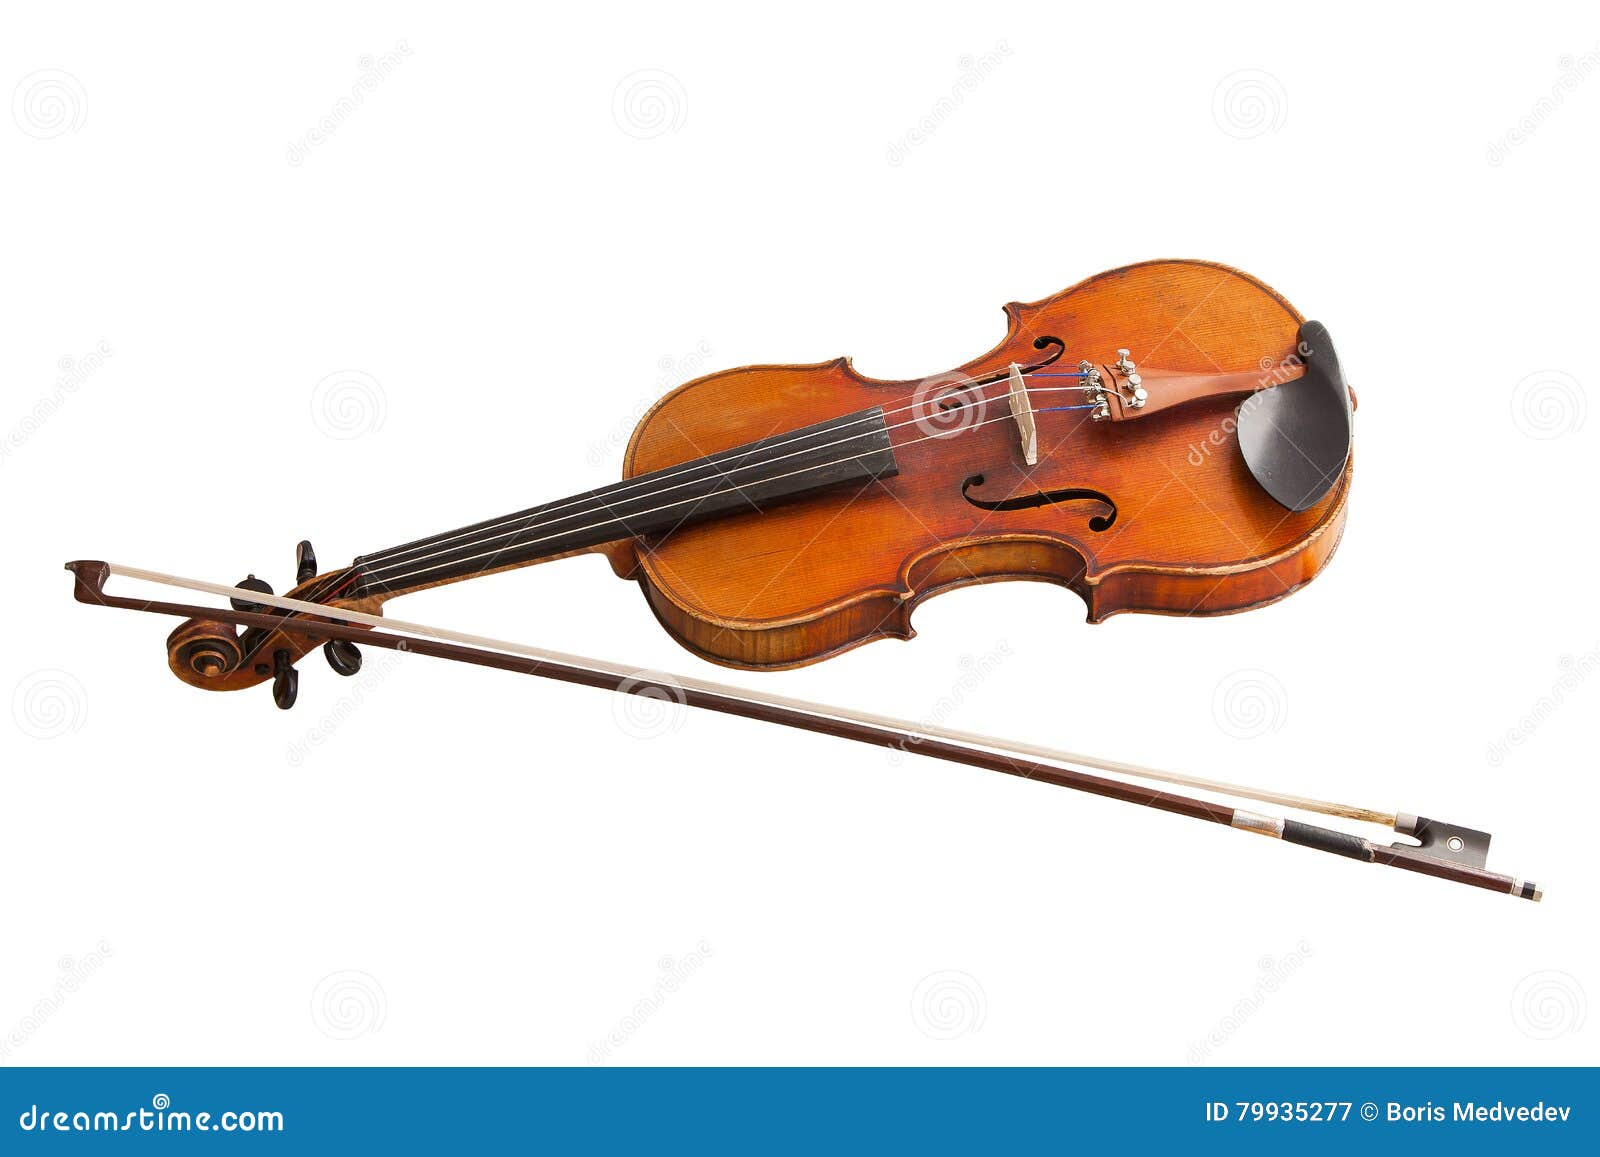 classic musical instrument, old violin  on a white background